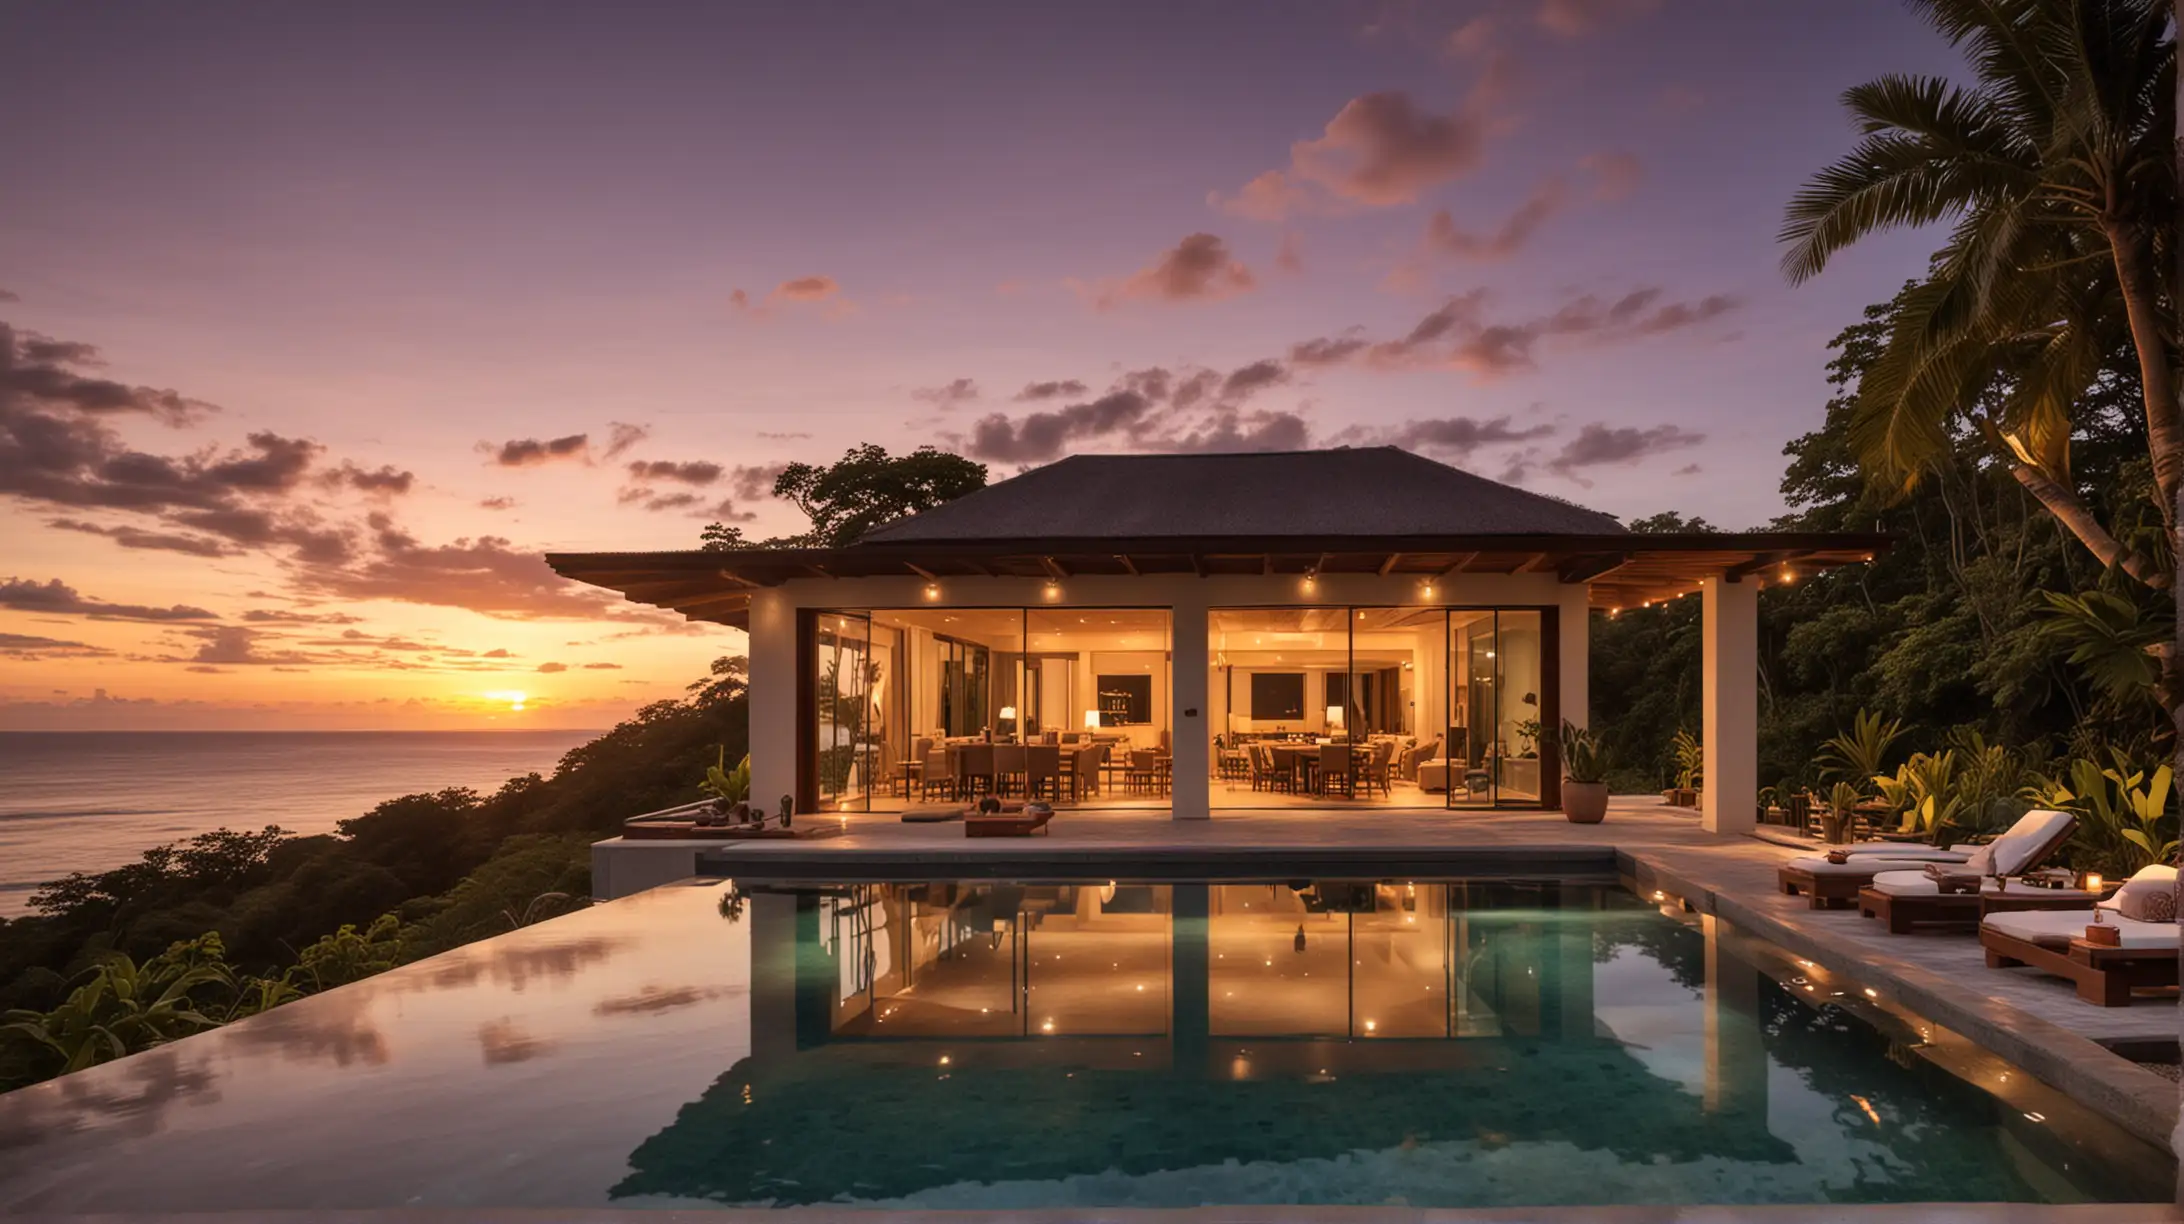 Luxurious Oceanfront Vacation Home with Infinity Pool in Costa Rica at Sunset